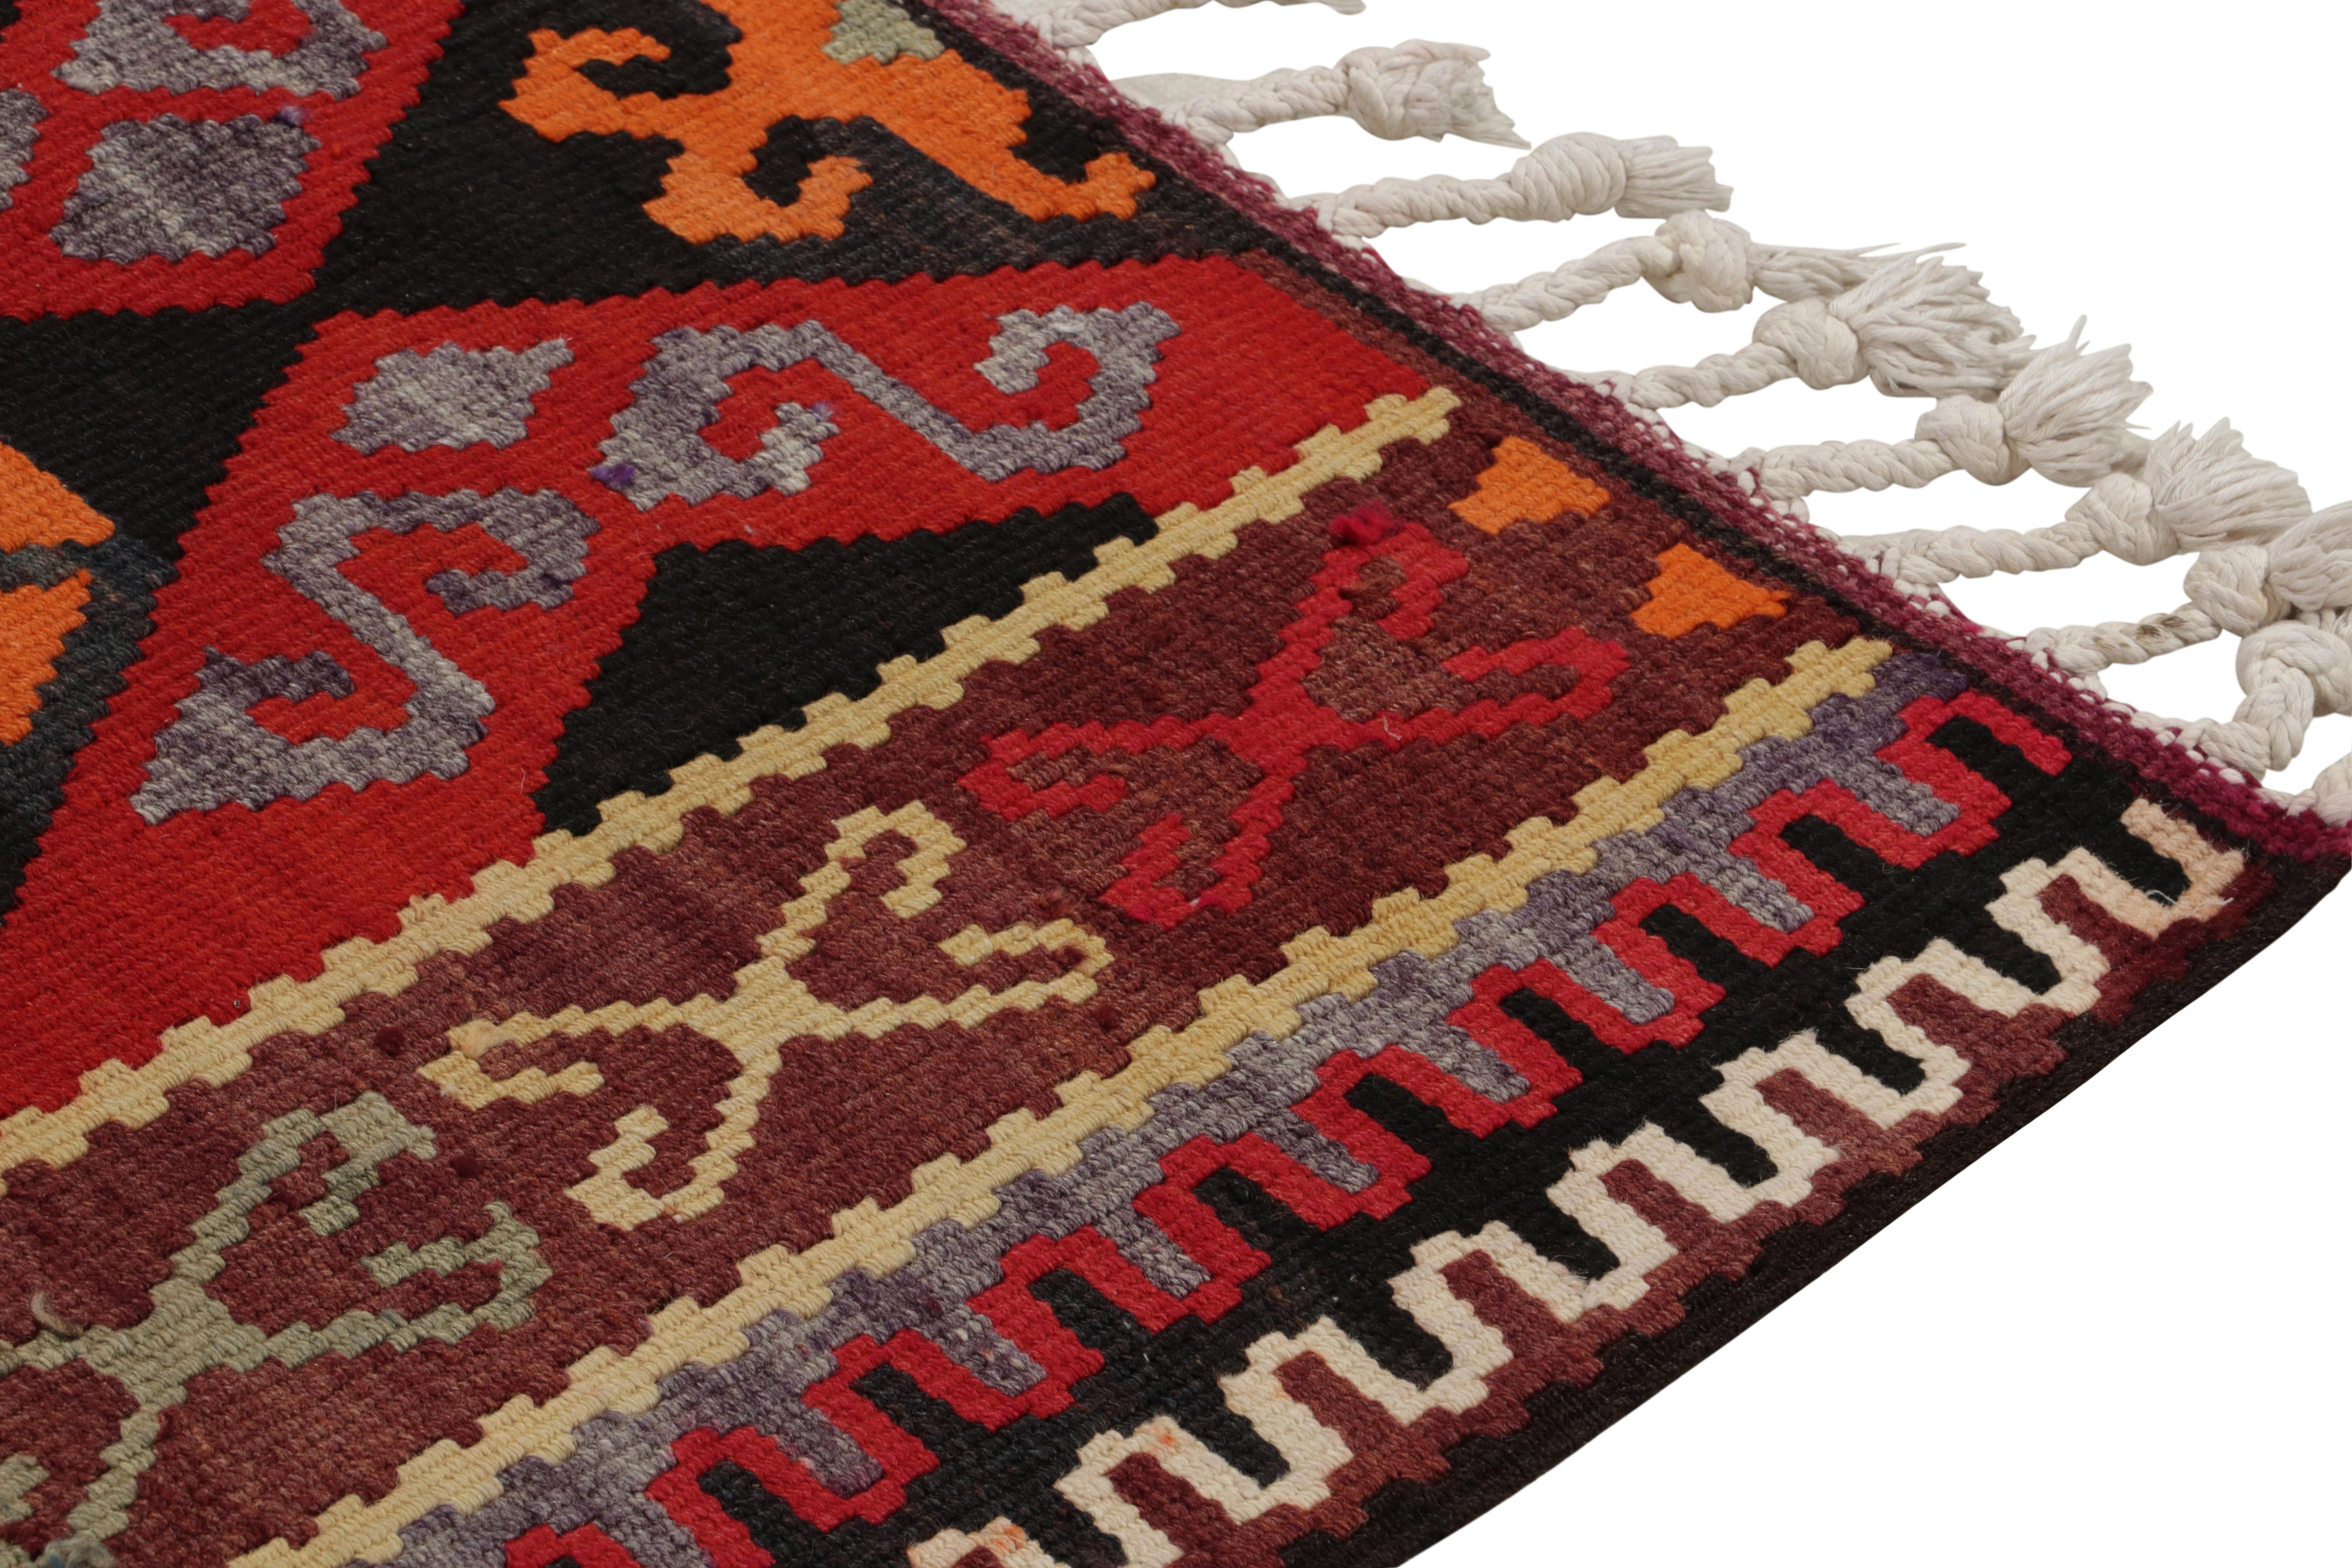 Vintage Tribal Kilim Runner in Red, Brown Geometric Pattern by Rug & Kilim In Good Condition For Sale In Long Island City, NY